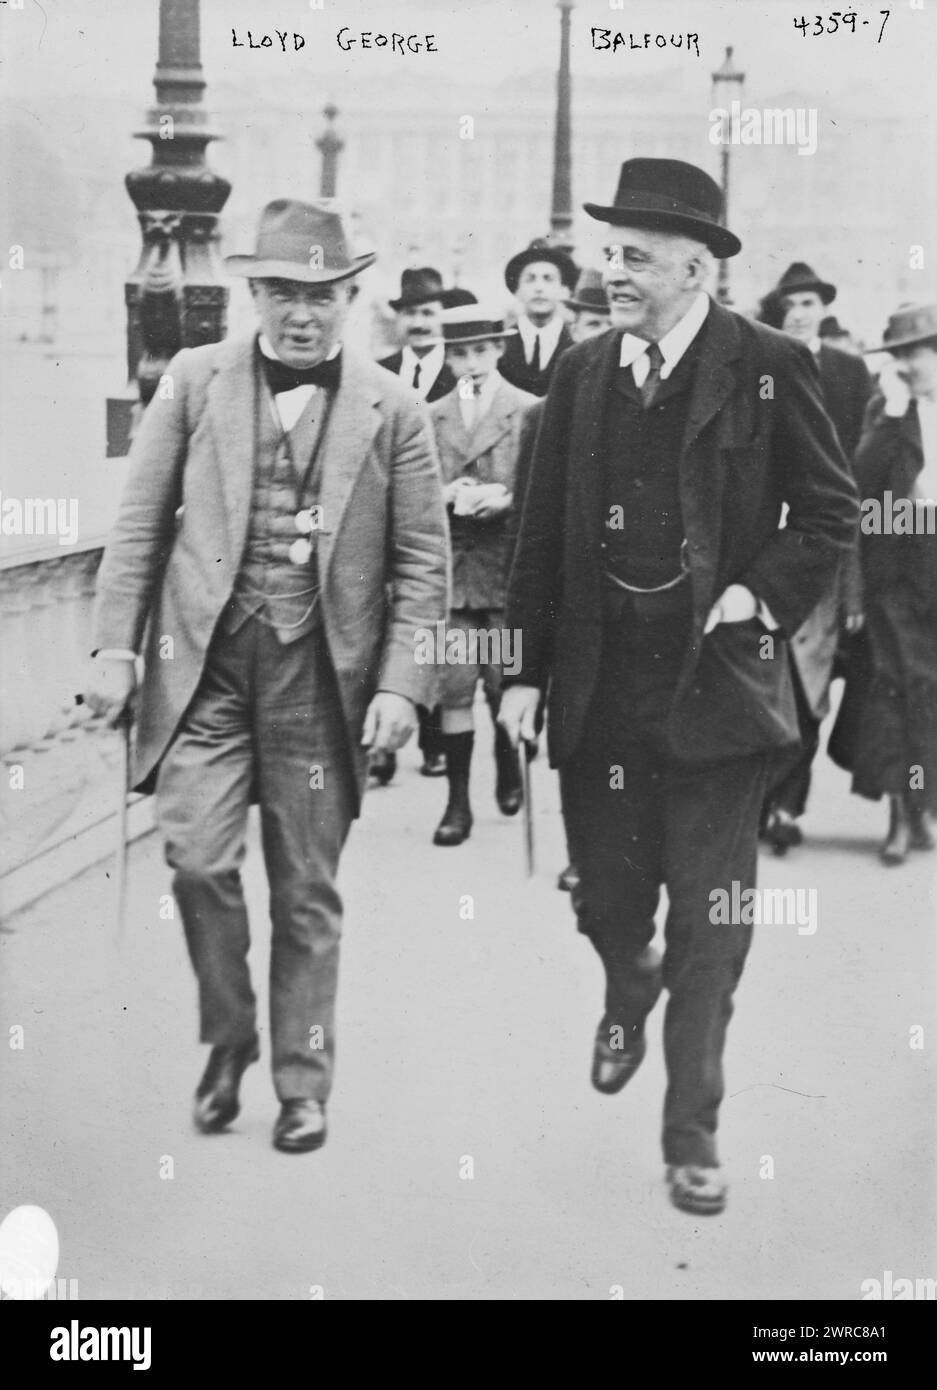 Lloyd George & Balfour, Photograph shows British Liberal Party statesman and Prime Minister David Lloyd George(1863-1945) walking with Conservative Party politician and Foreign Minister Arthur James Balfour (1848-1930) during the time of the Allied Conference in Paris, July 1917., 1917 July, Glass negatives, 1 negative: glass Stock Photo